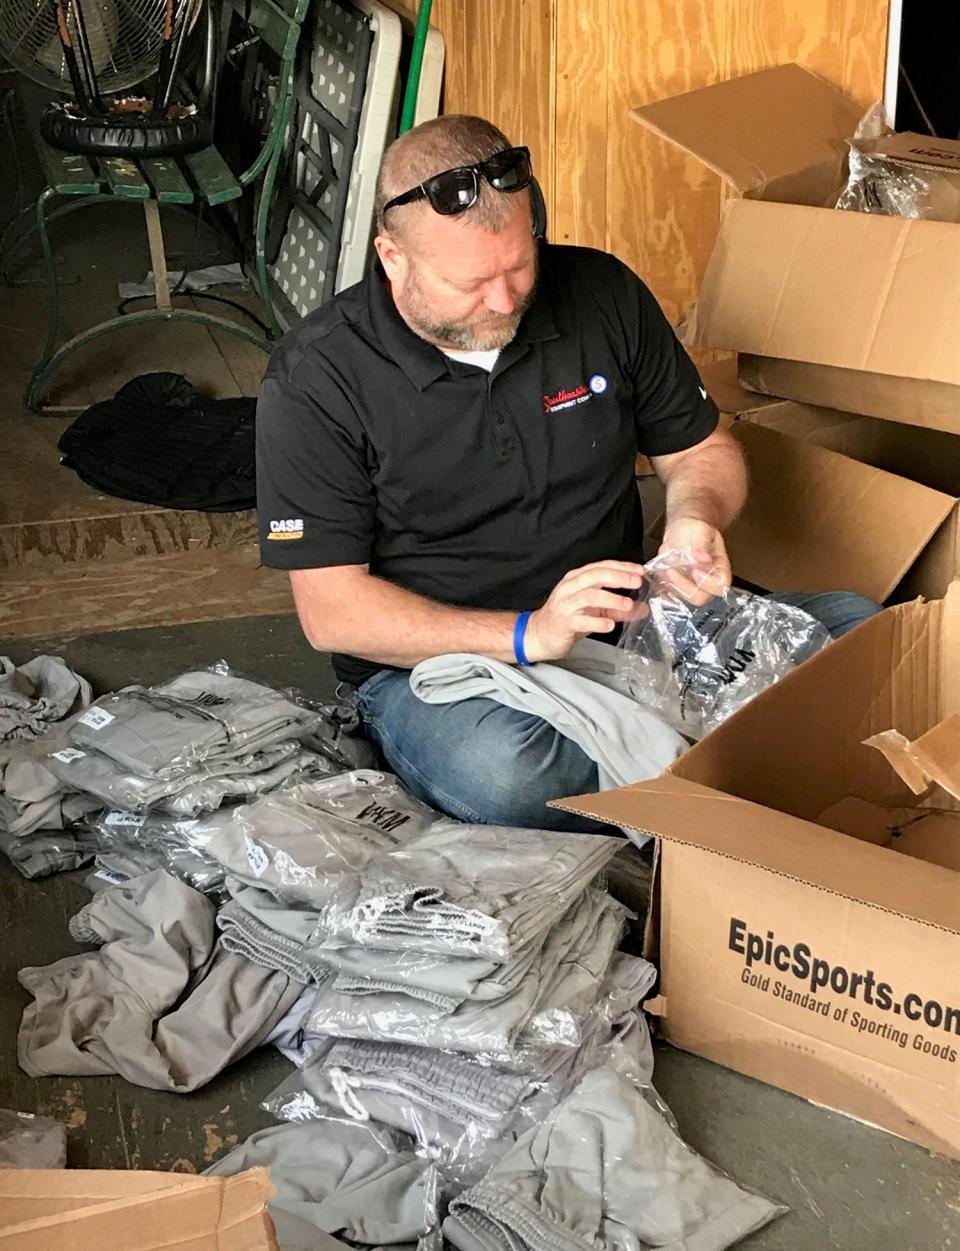 Cambridge Little League president Travis Daugherty sorts baseball pants in preparation for the season. The Cambridge Little League will hold its Opening Day Celebration on Saturday.